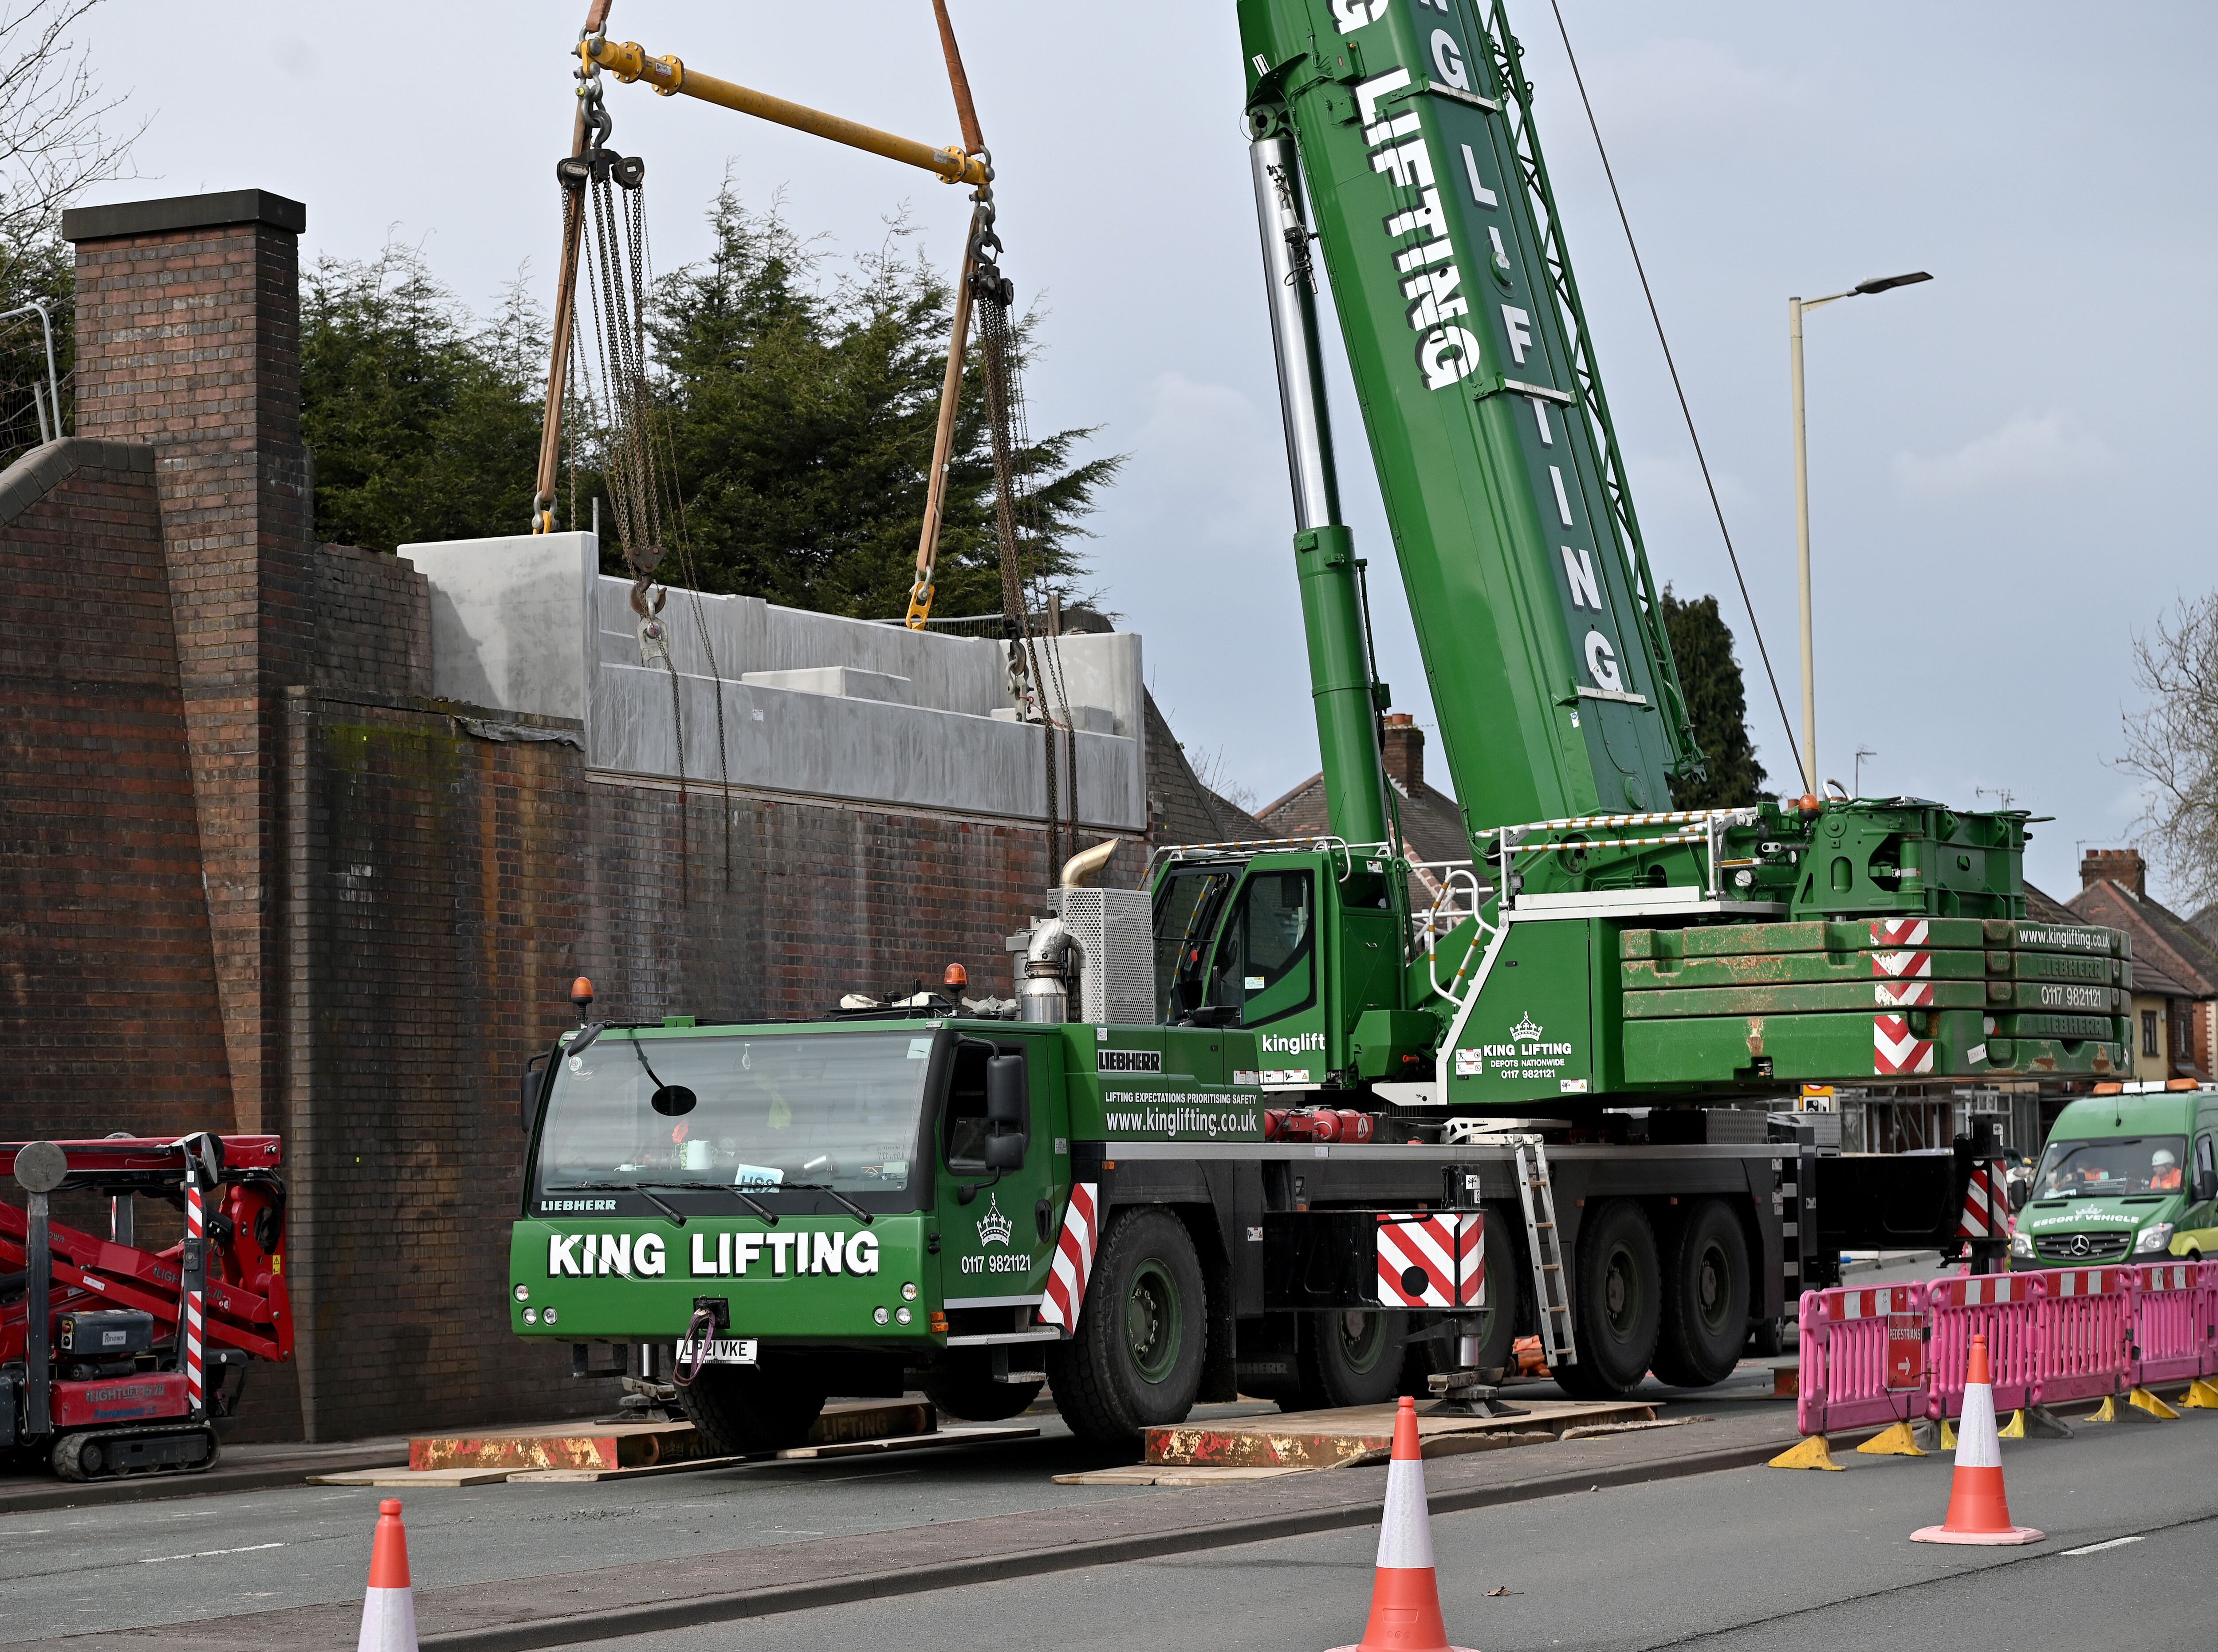 Watch: Work to install new tram bridge over Dudley main road starts - first piece put in place